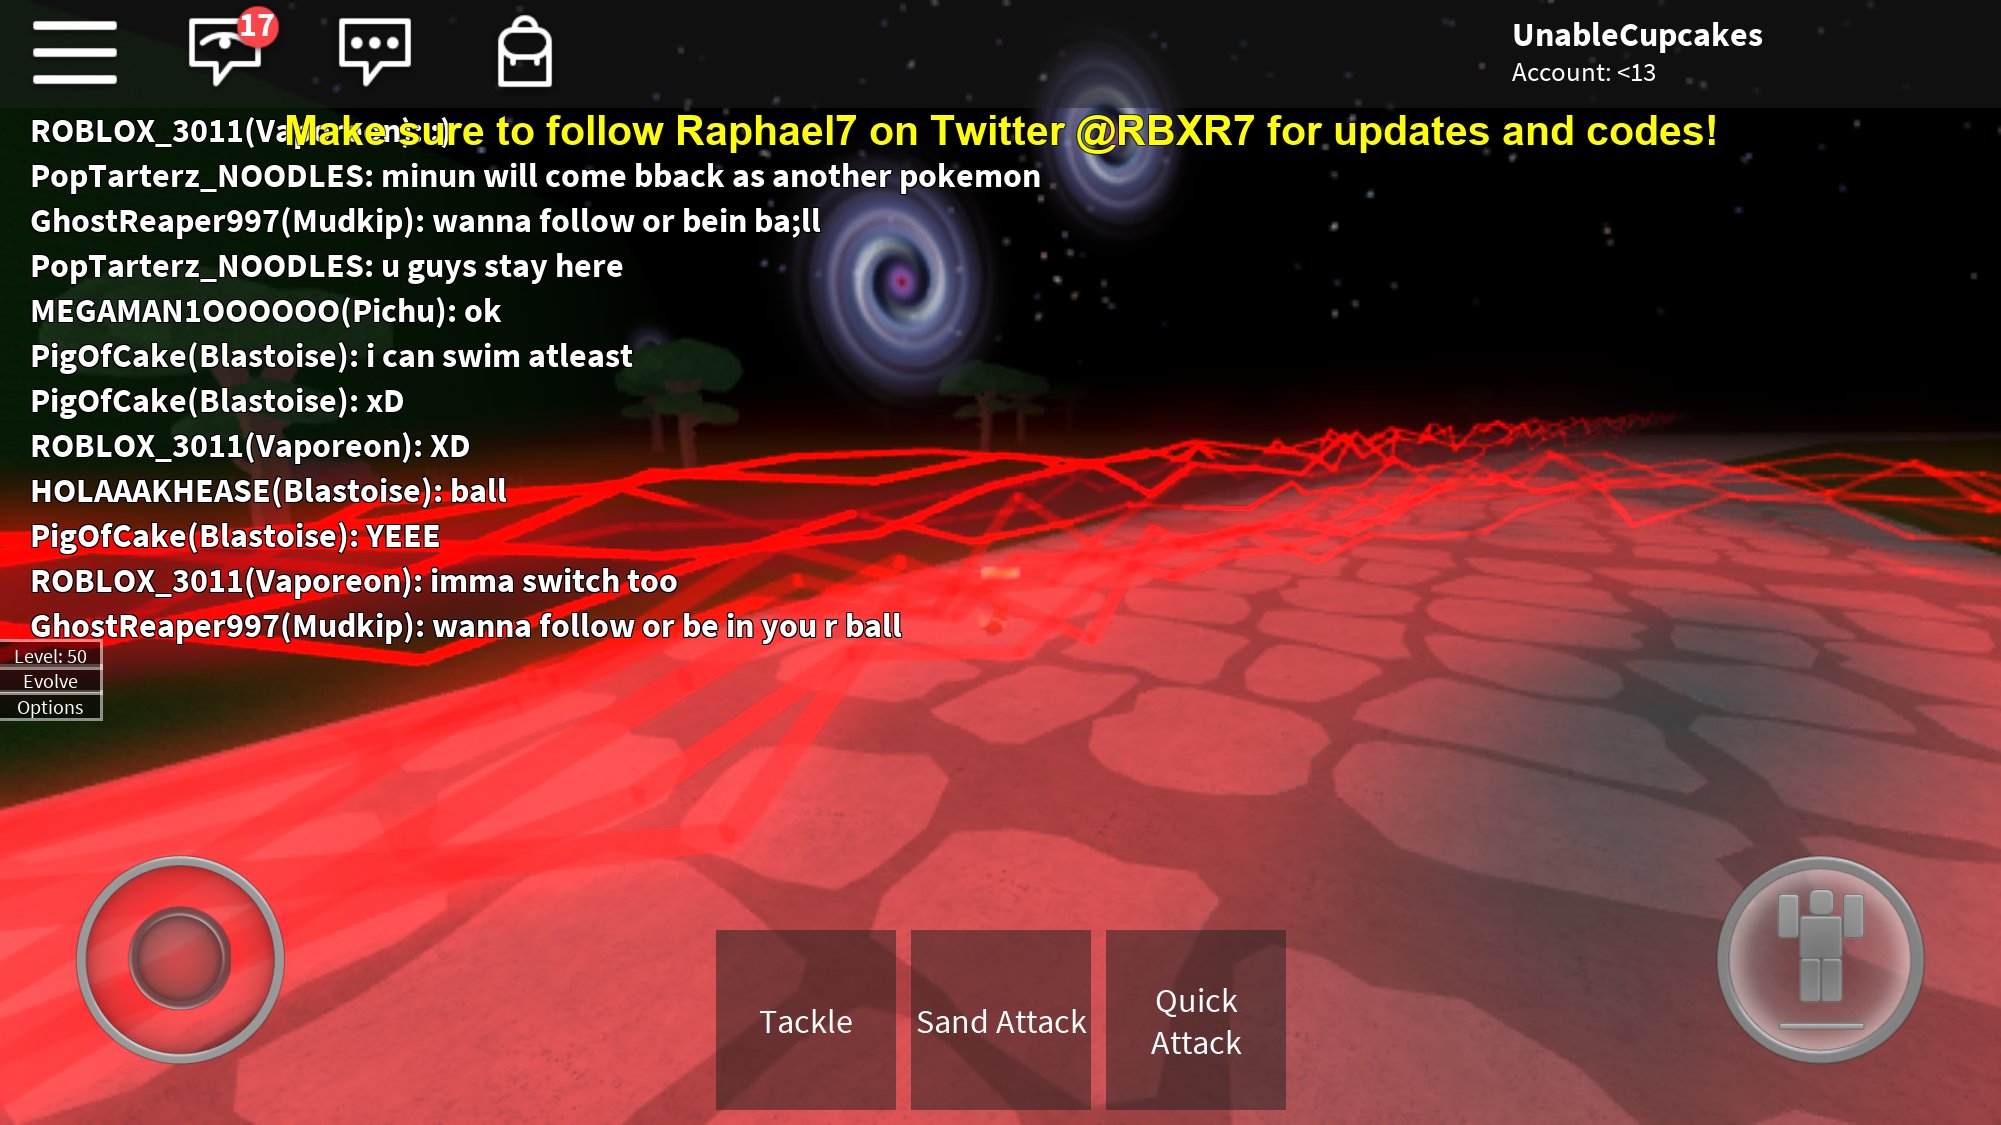 Jangles On Twitter Weird Stuff Going On With Roblox Pokemon